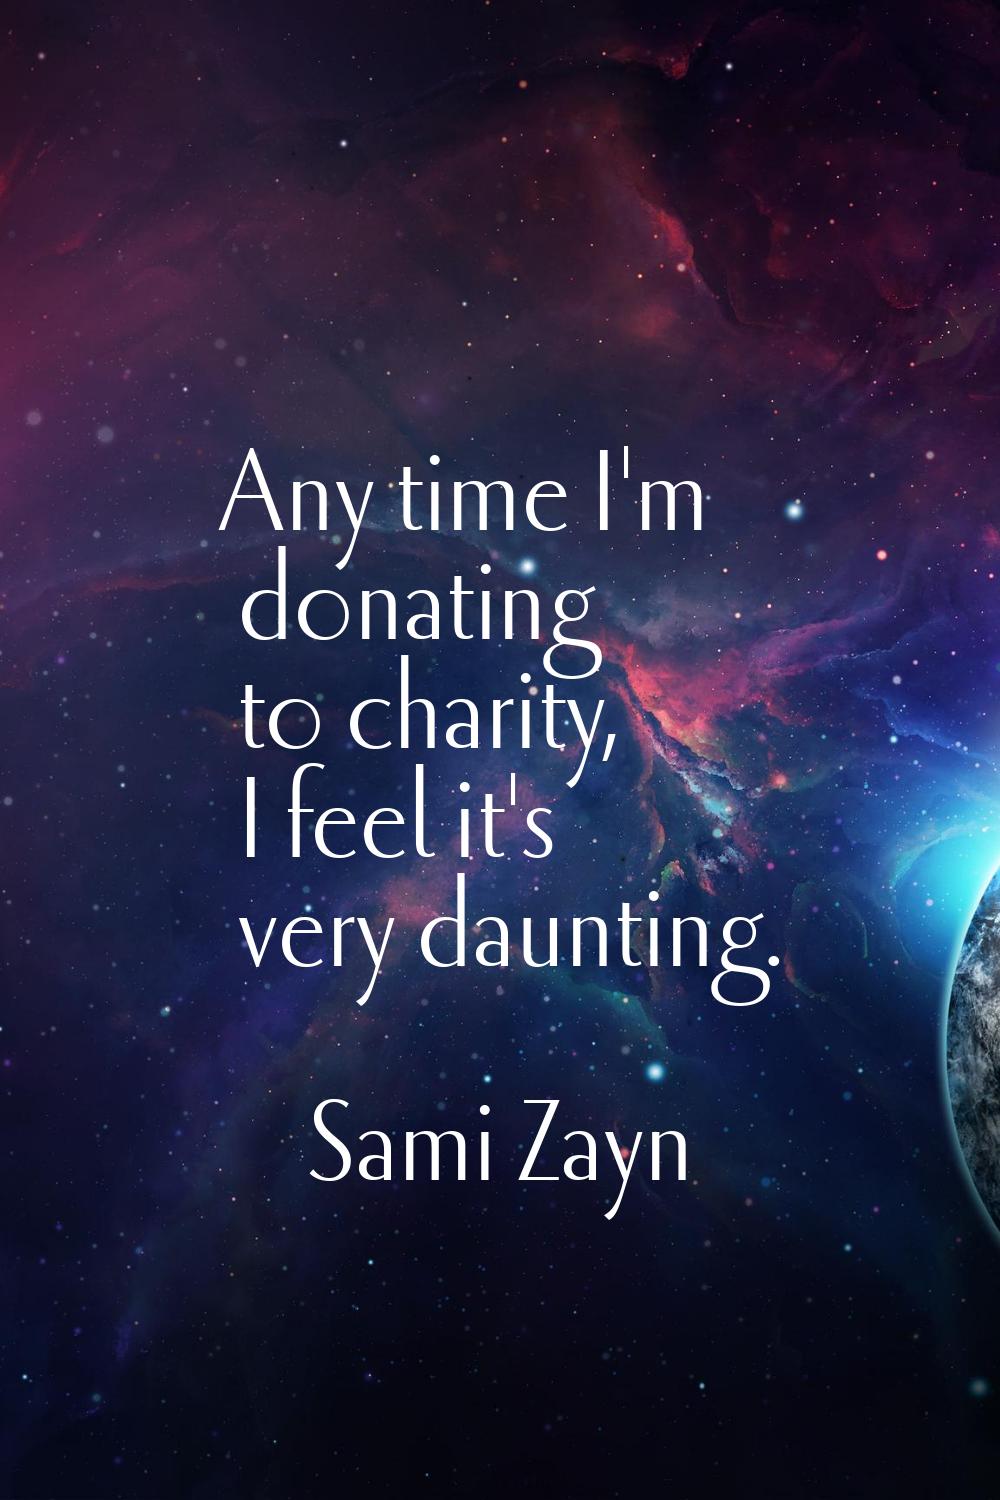 Any time I'm donating to charity, I feel it's very daunting.